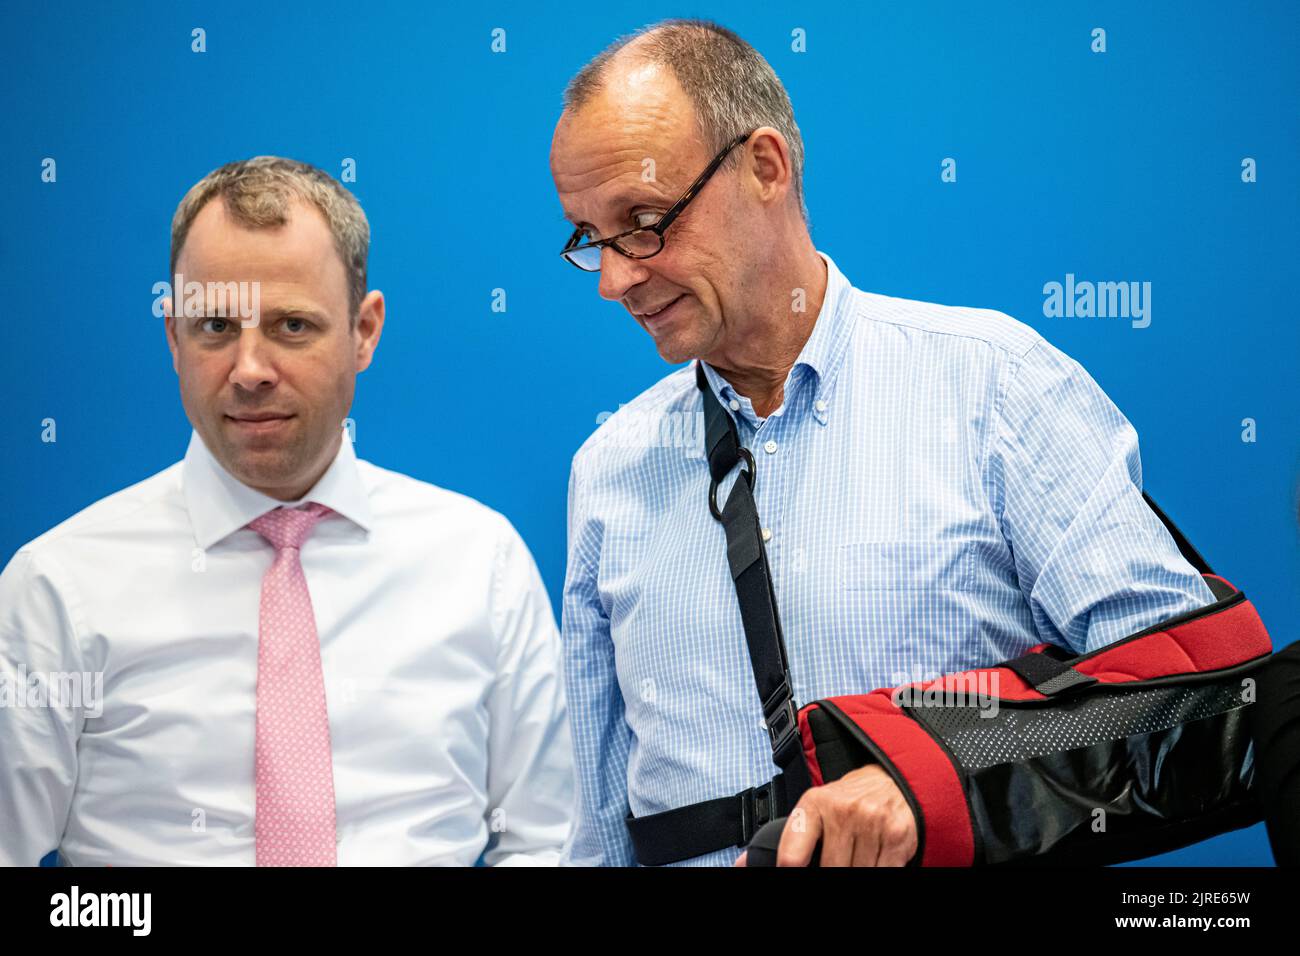 24 August 2022, Berlin: Mario Czaja, CDU secretary general, and Friedrich Merz (r), CDU leader, arrive at a meeting of the CDU federal executive committee. CDU leader Friedrich Merz broke his collarbone while on vacation in Bavaria and wears a sling to immobilize his arm. Photo: Fabian Sommer/dpa Stock Photo